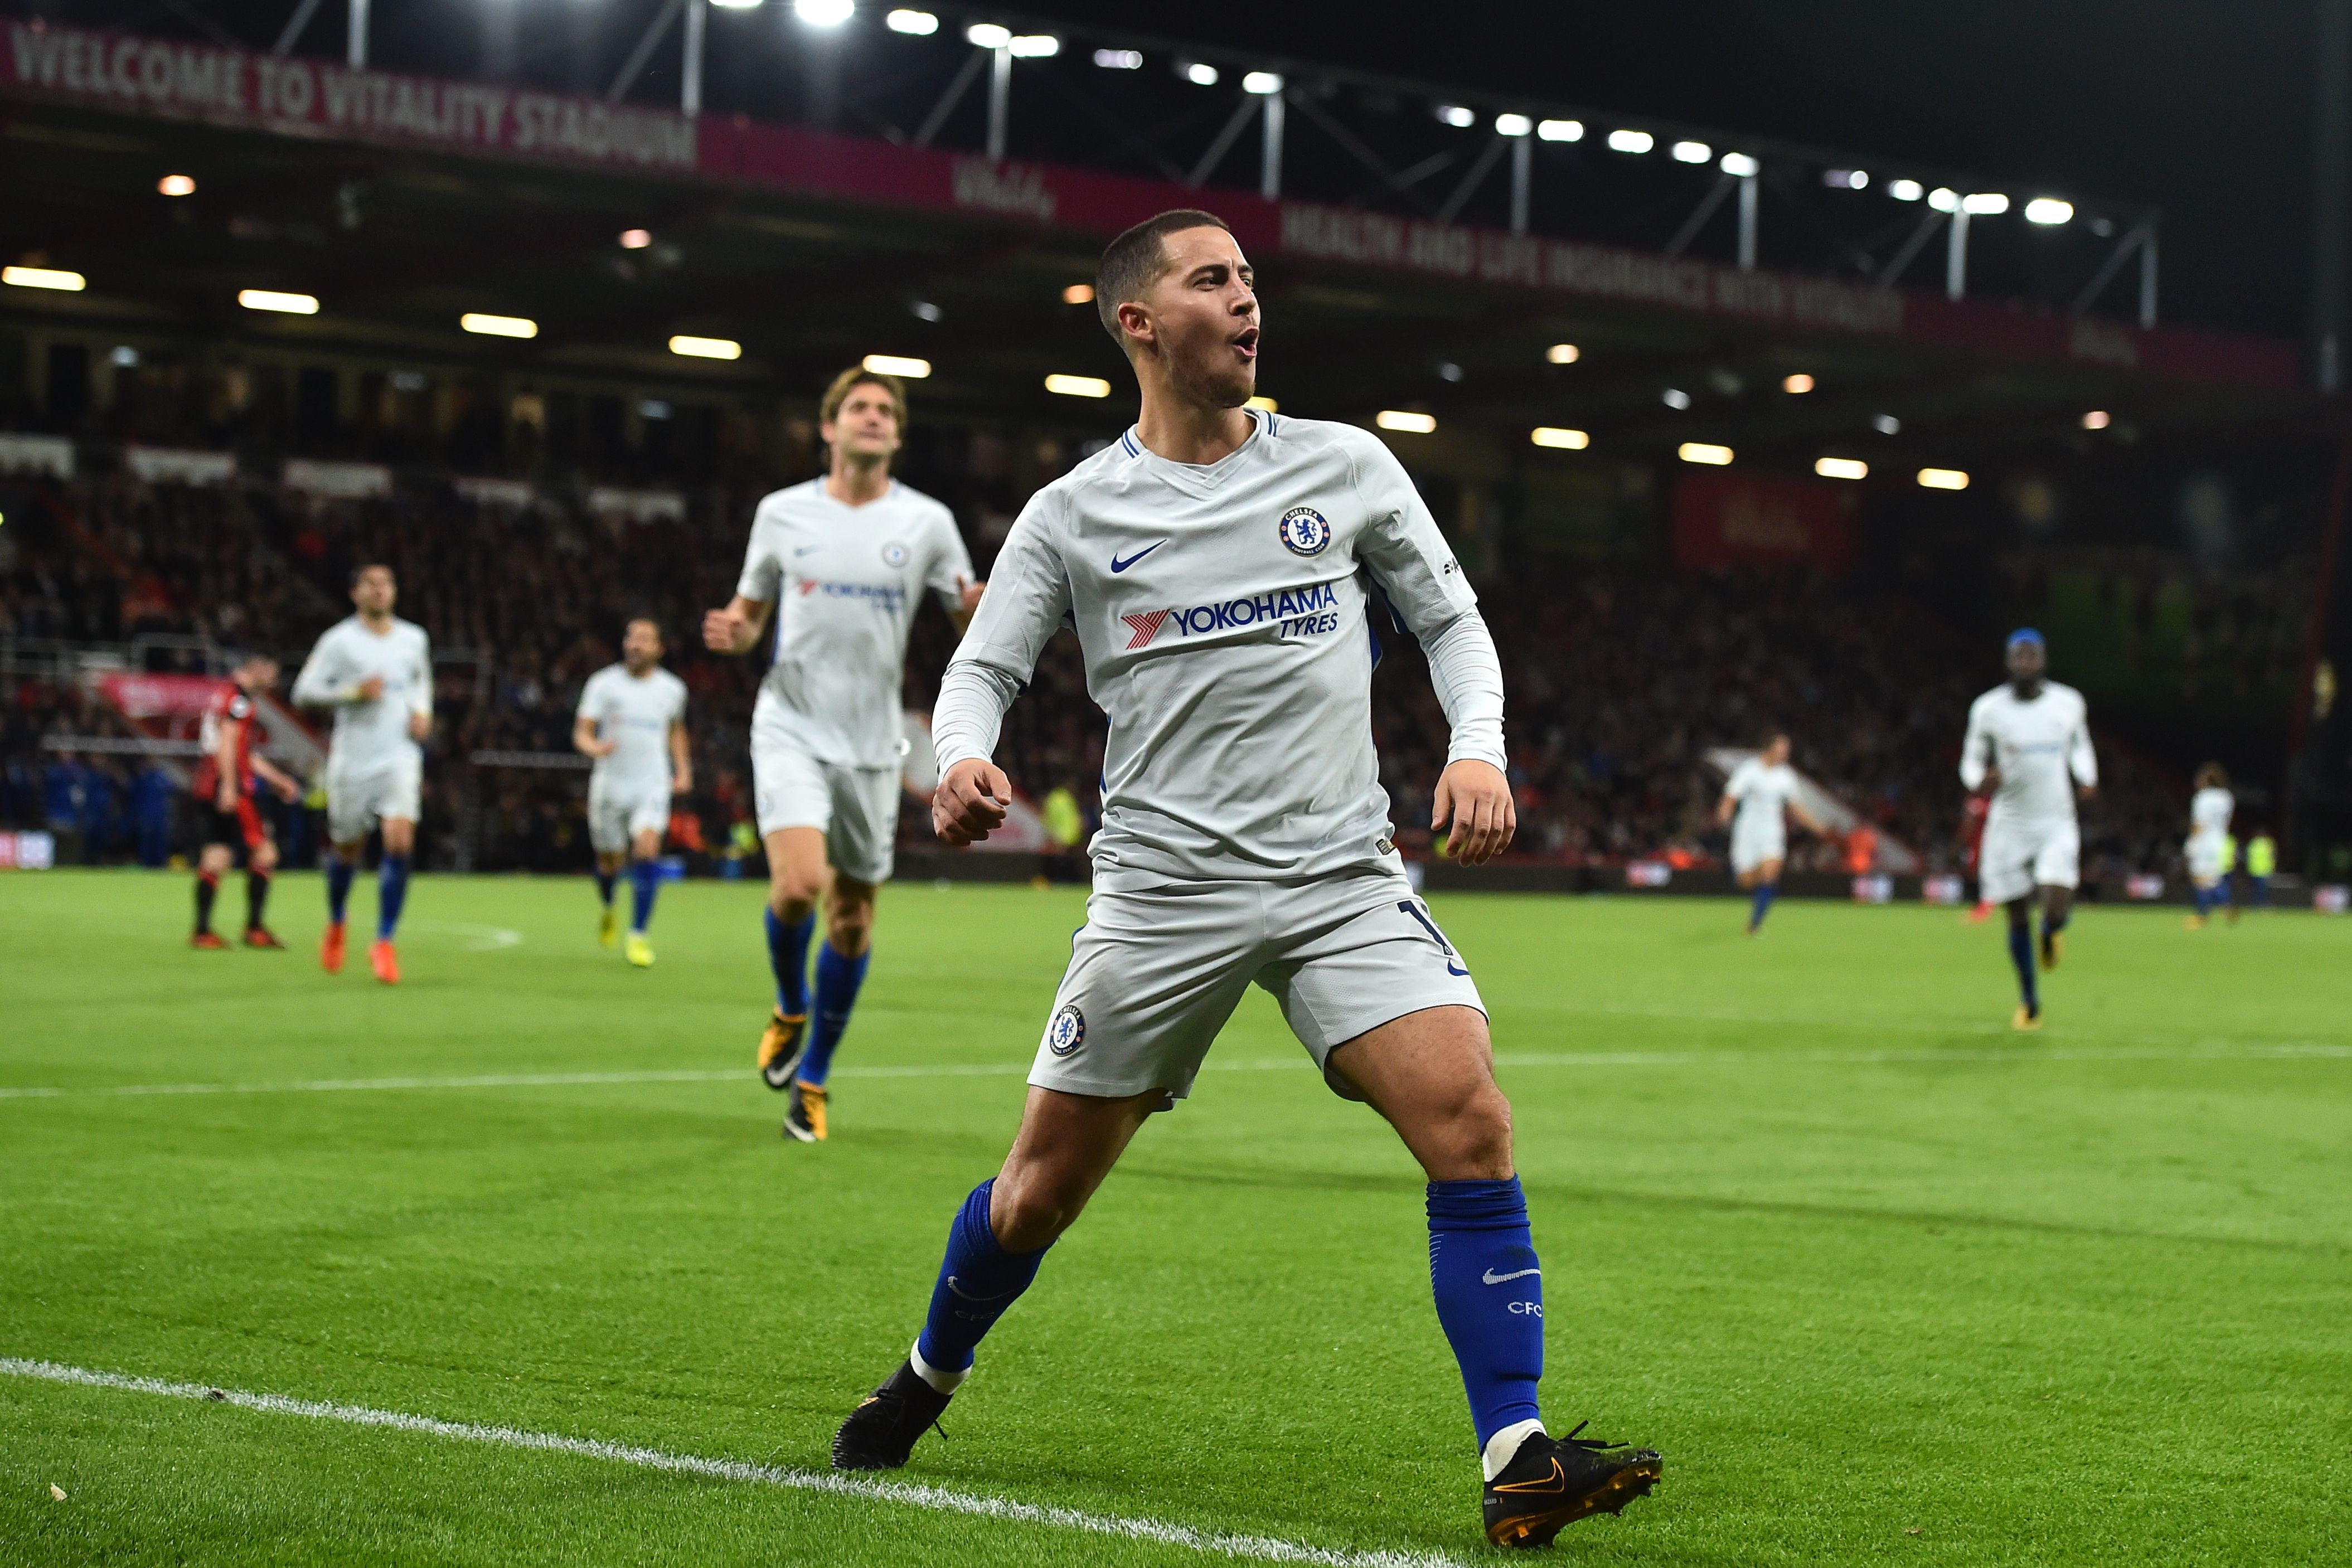 Chelsea's Belgian midfielder Eden Hazard celebrates after scoring the opening goal of the English Premier League football match between Bournemouth and Chelsea at the Vitality Stadium in Bournemouth, southern England on October 28, 2017. / AFP PHOTO / Glyn KIRK / RESTRICTED TO EDITORIAL USE. No use with unauthorized audio, video, data, fixture lists, club/league logos or 'live' services. Online in-match use limited to 75 images, no video emulation. No use in betting, games or single club/league/player publications.  /         (Photo credit should read GLYN KIRK/AFP/Getty Images)